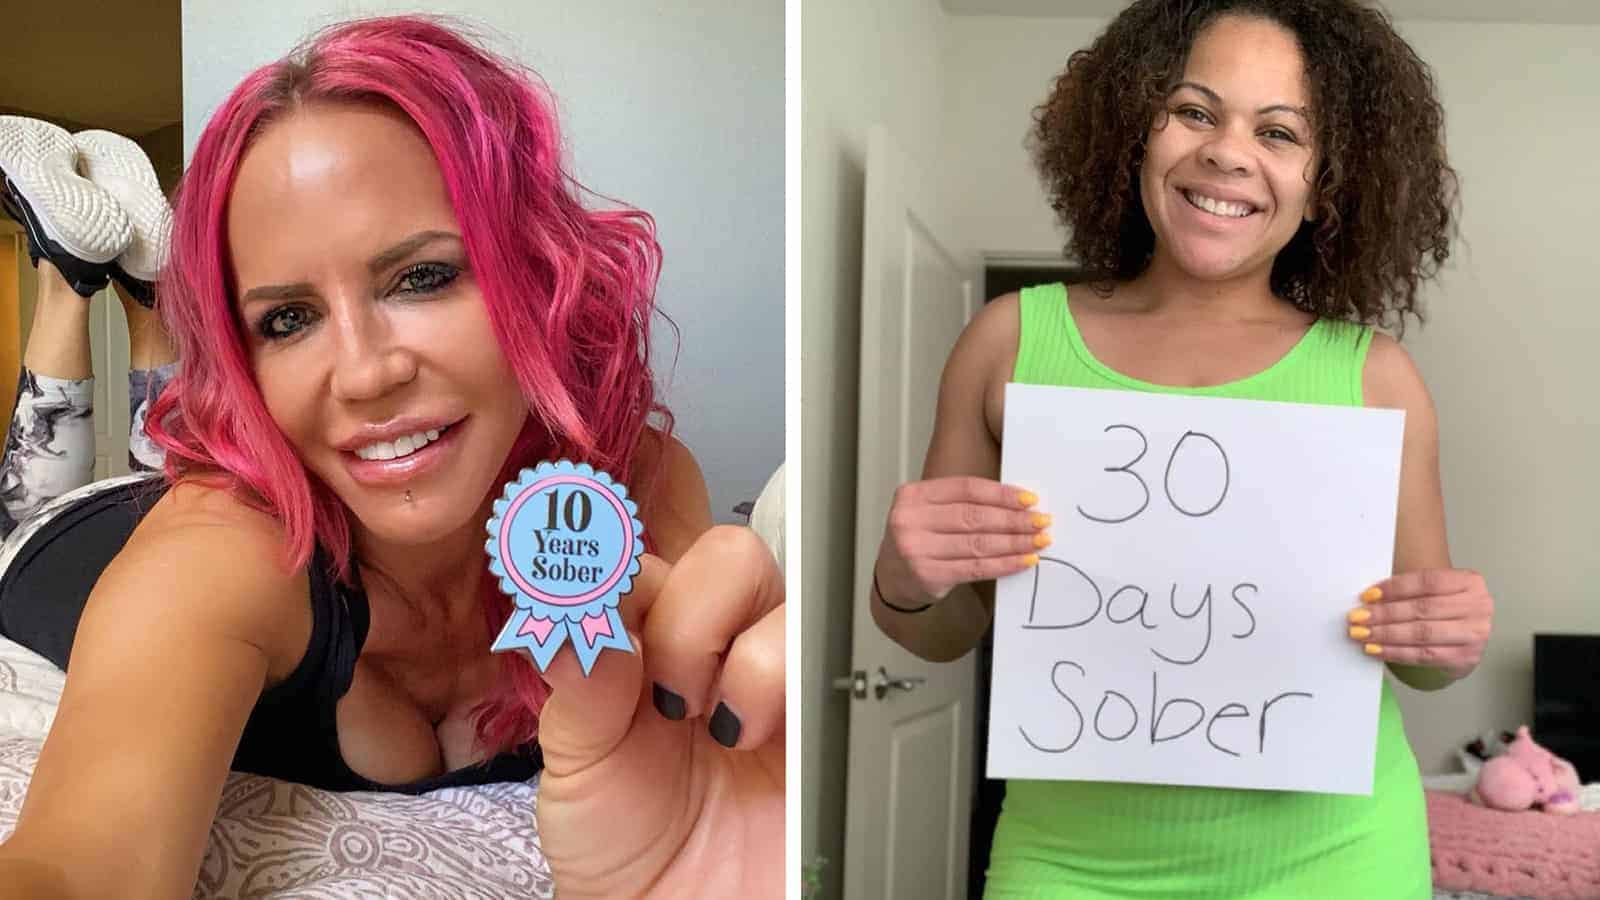 Sober Mom Squad Helped Young Women With Sobriety During Pandemic